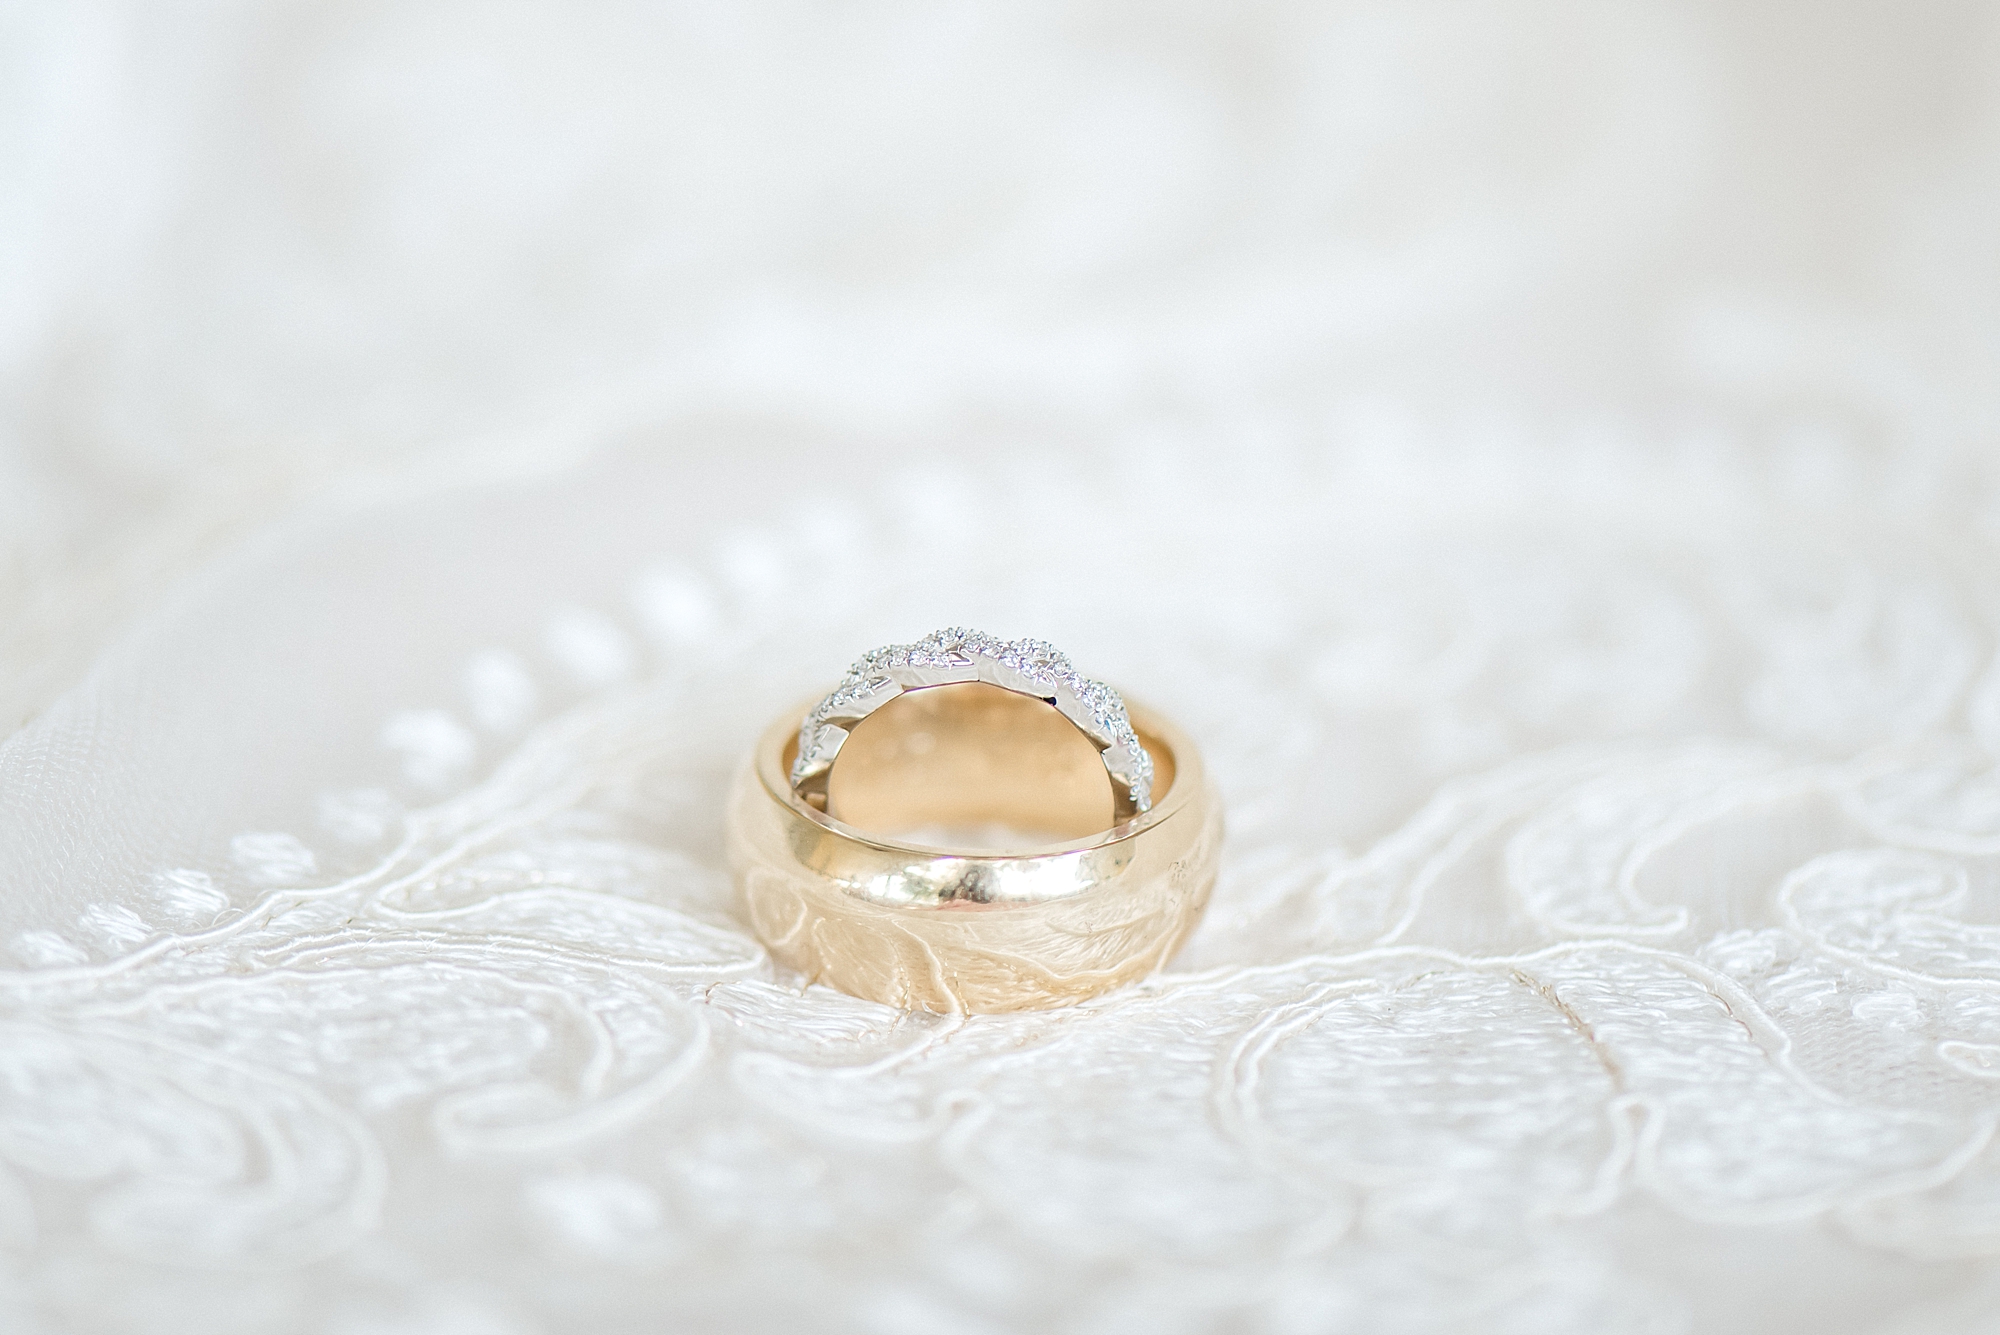 gold wedding rings on lace from wedding dress